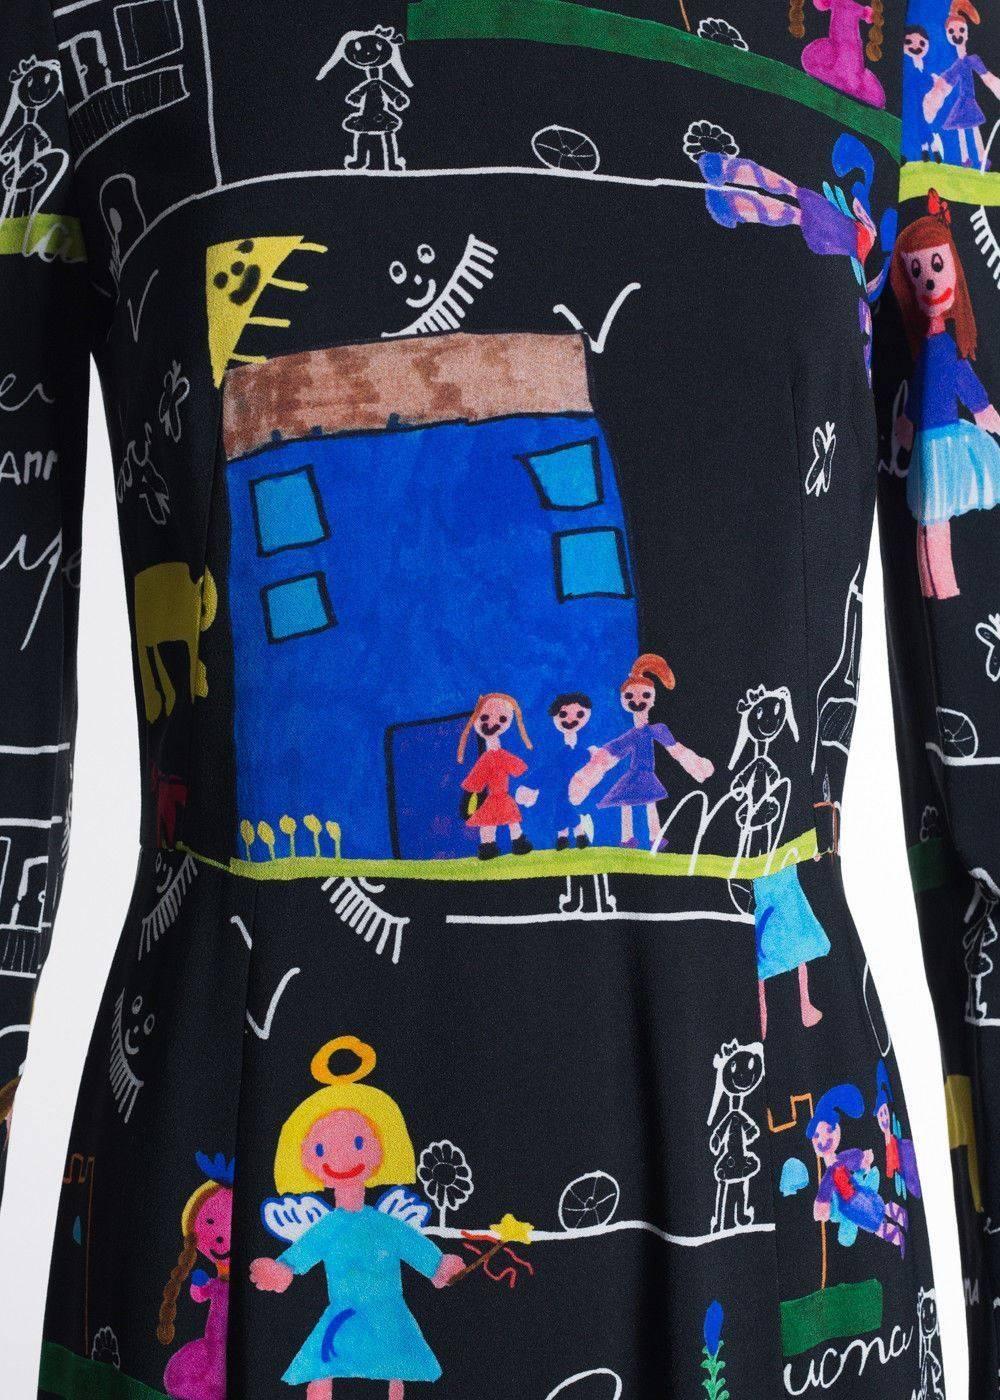 Brand New Dolce & Gabbana Women's Dress
Original Tags & Hanger Included
Retails in Stores & Online for $1258
Size IT46 / US10 Fits True to Size

Highlighting a family-focused collection, a colorful children's drawing paying homage to mothers lends